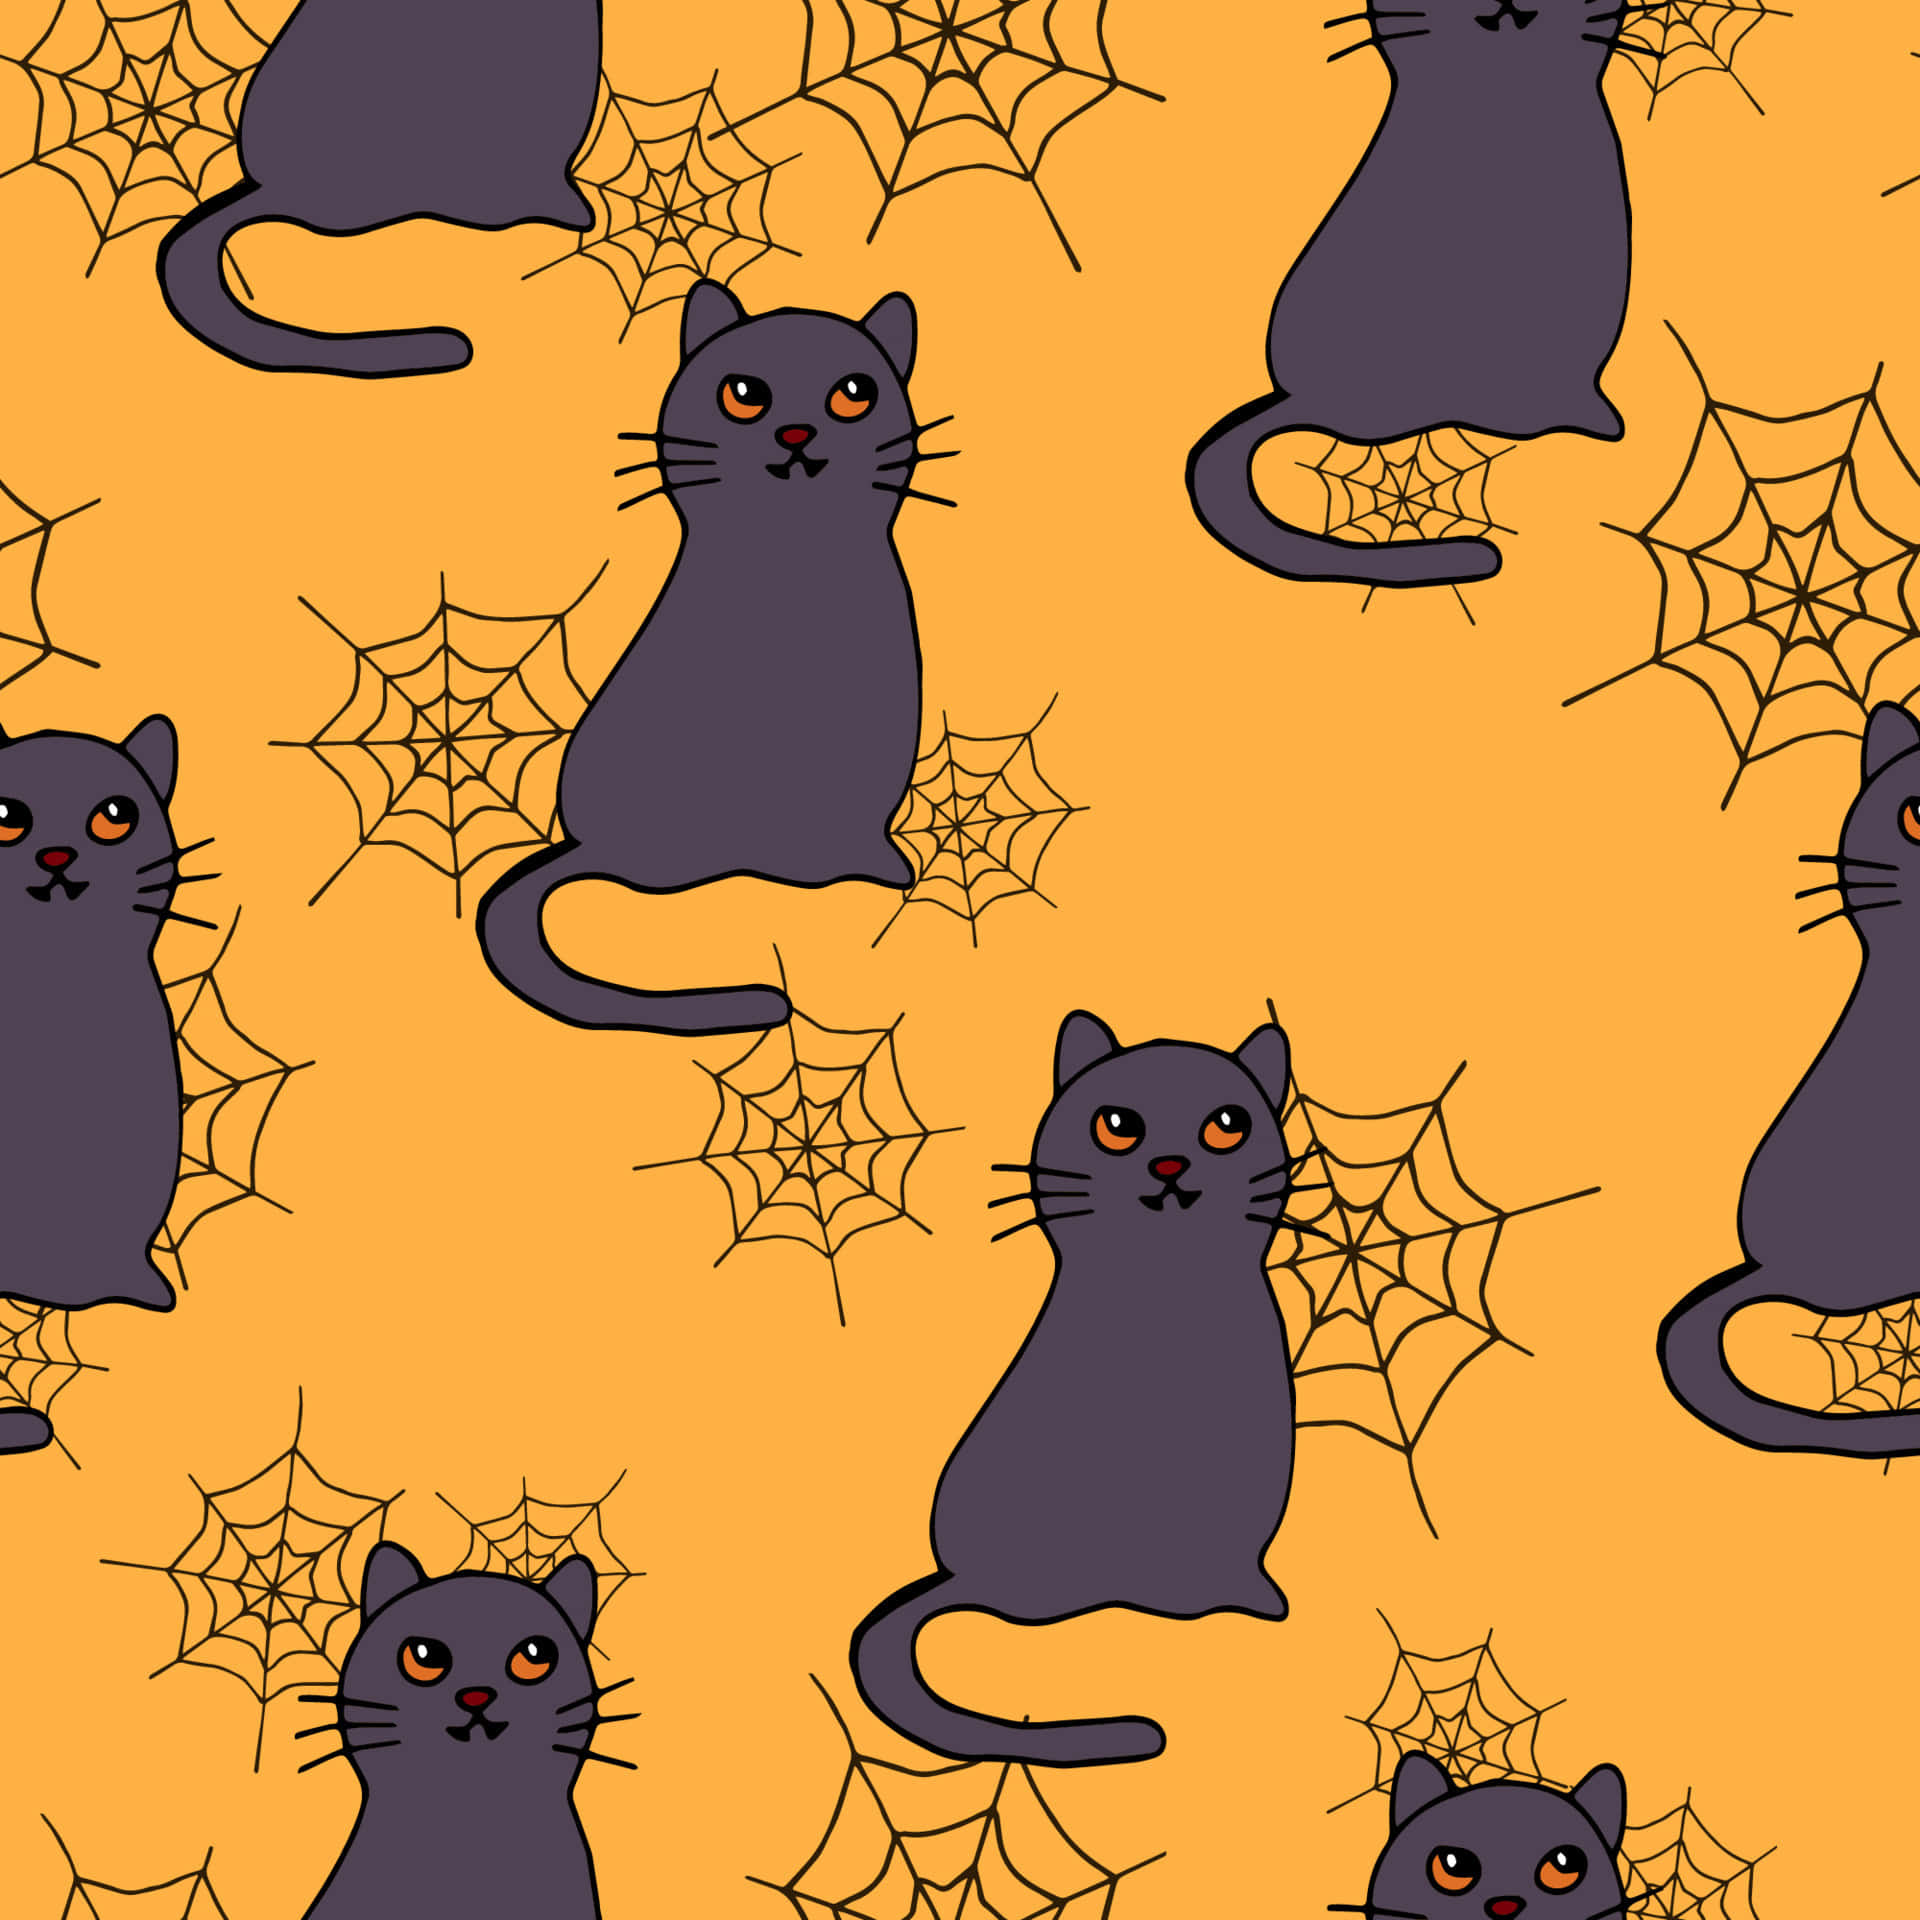 Celebrate Halloween with this spooky cat!" Wallpaper